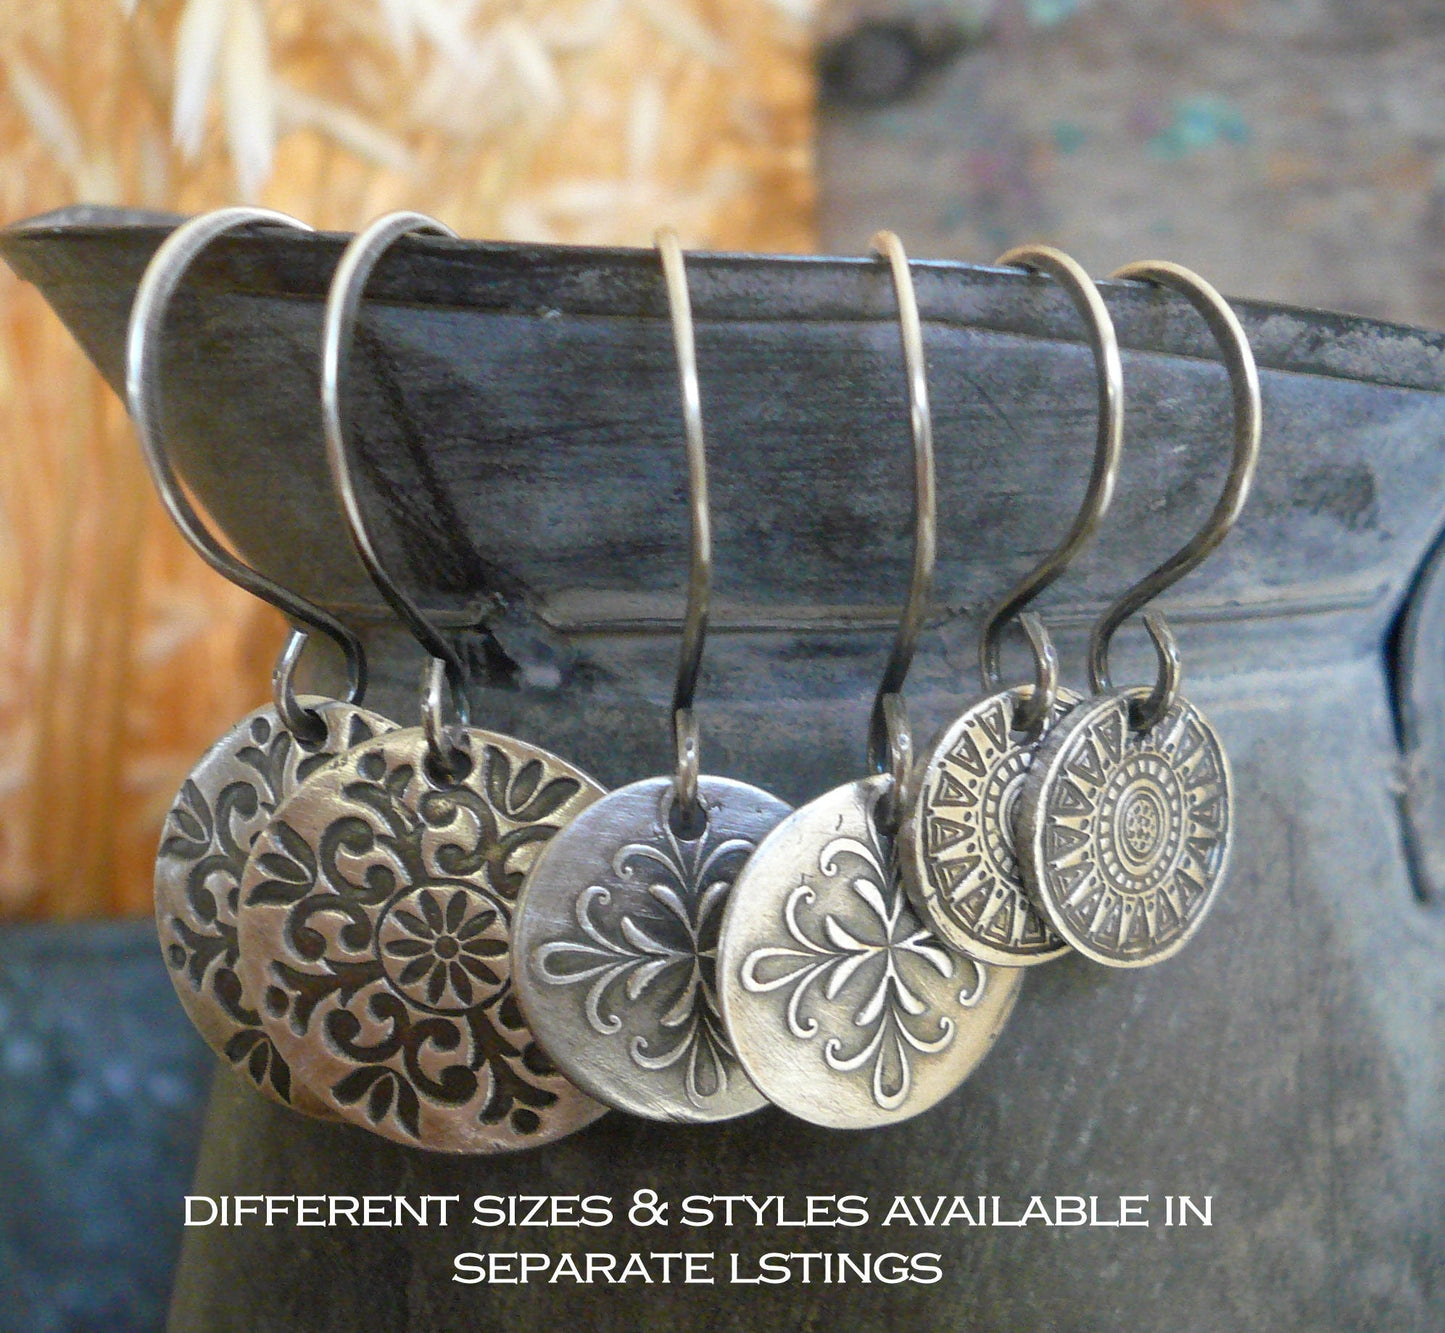 Medallion Earrings Large Style II - Handmade. Oxidized fine and sterling silver